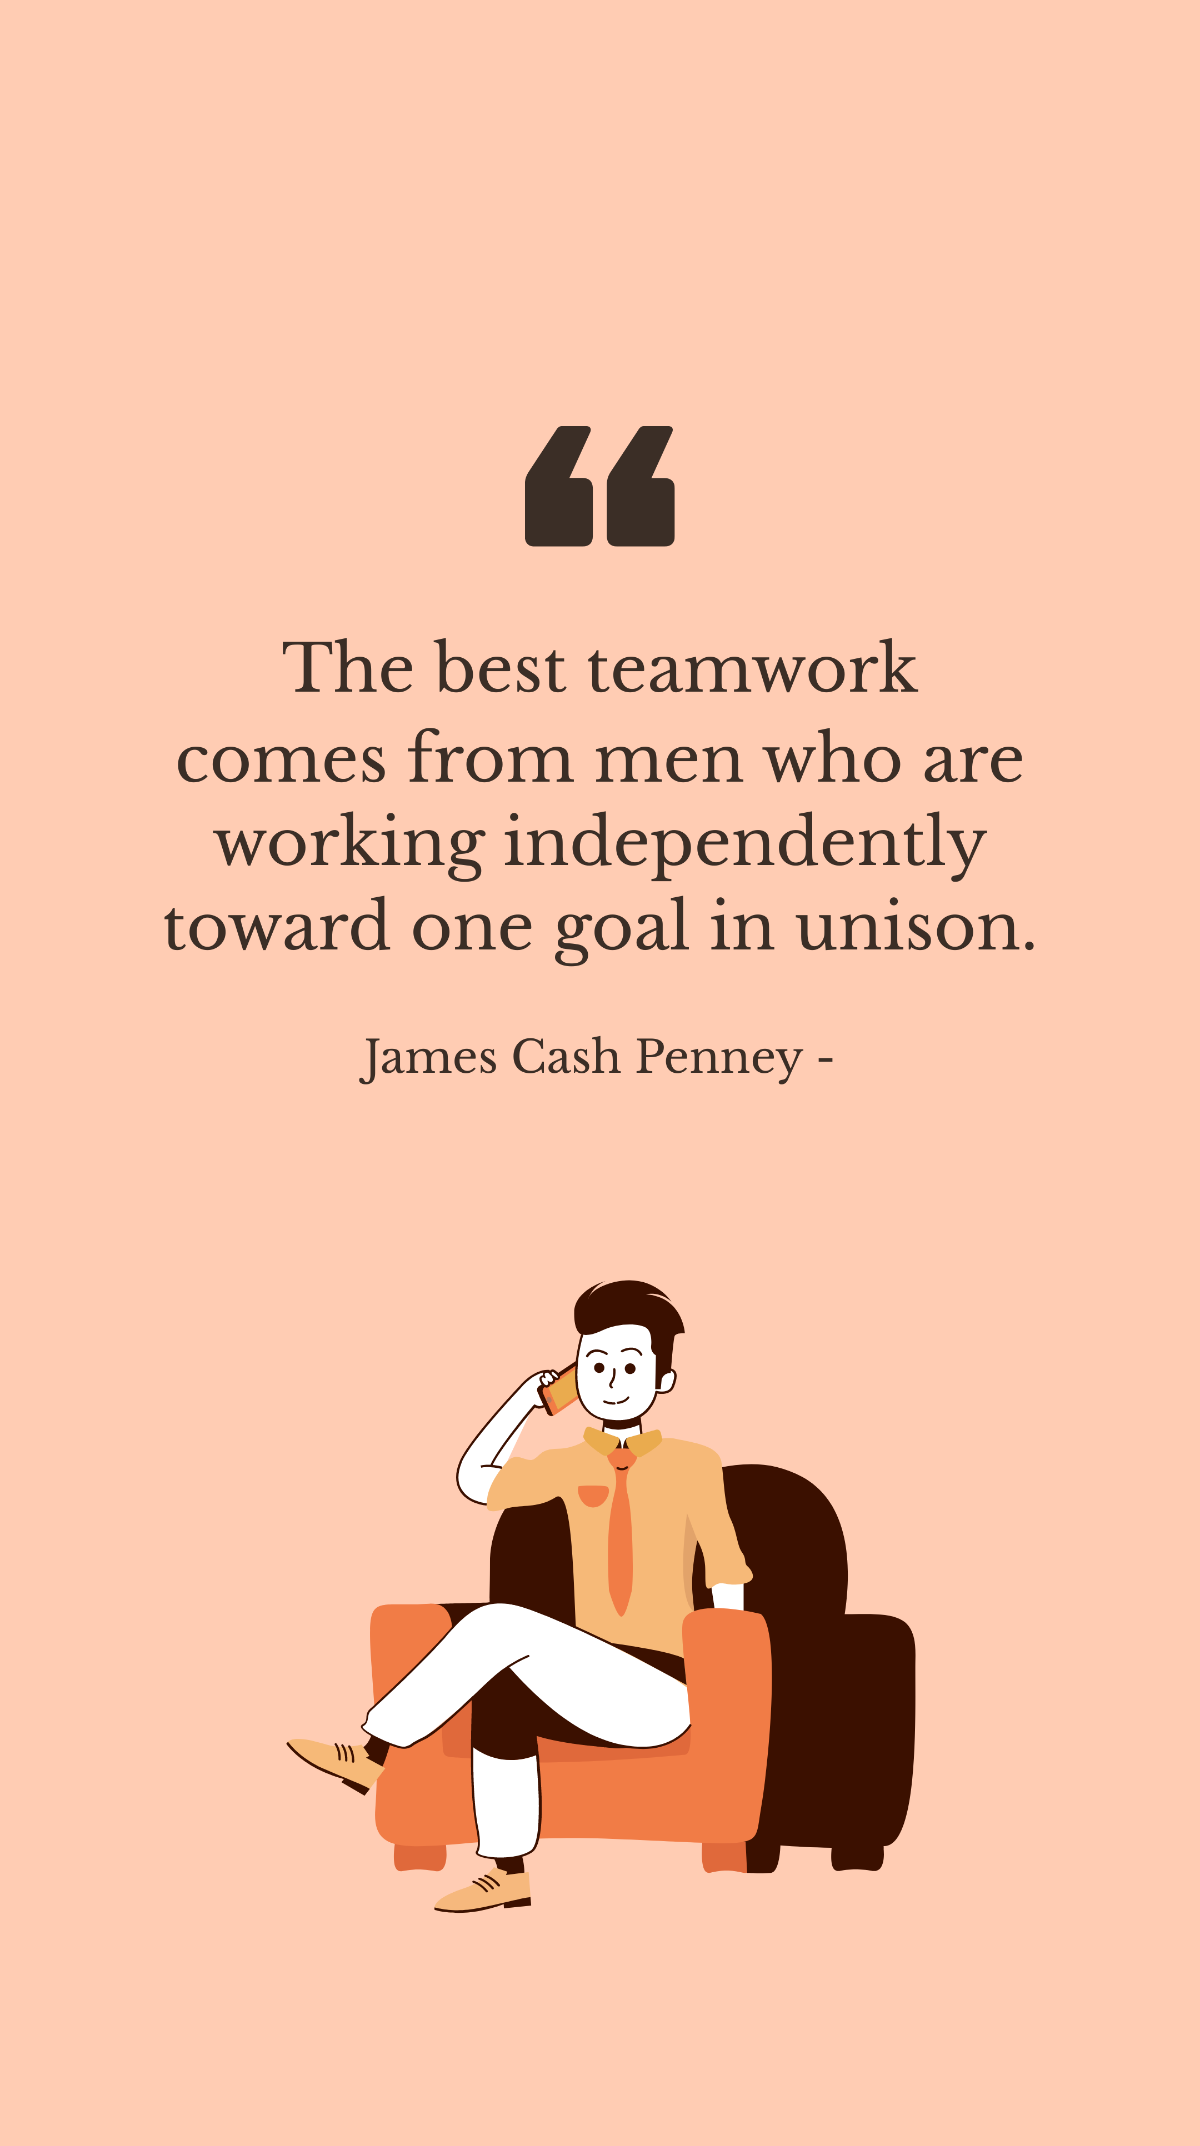 Free James Cash Penney - The best teamwork comes from men who are working independently toward one goal in unison. Template